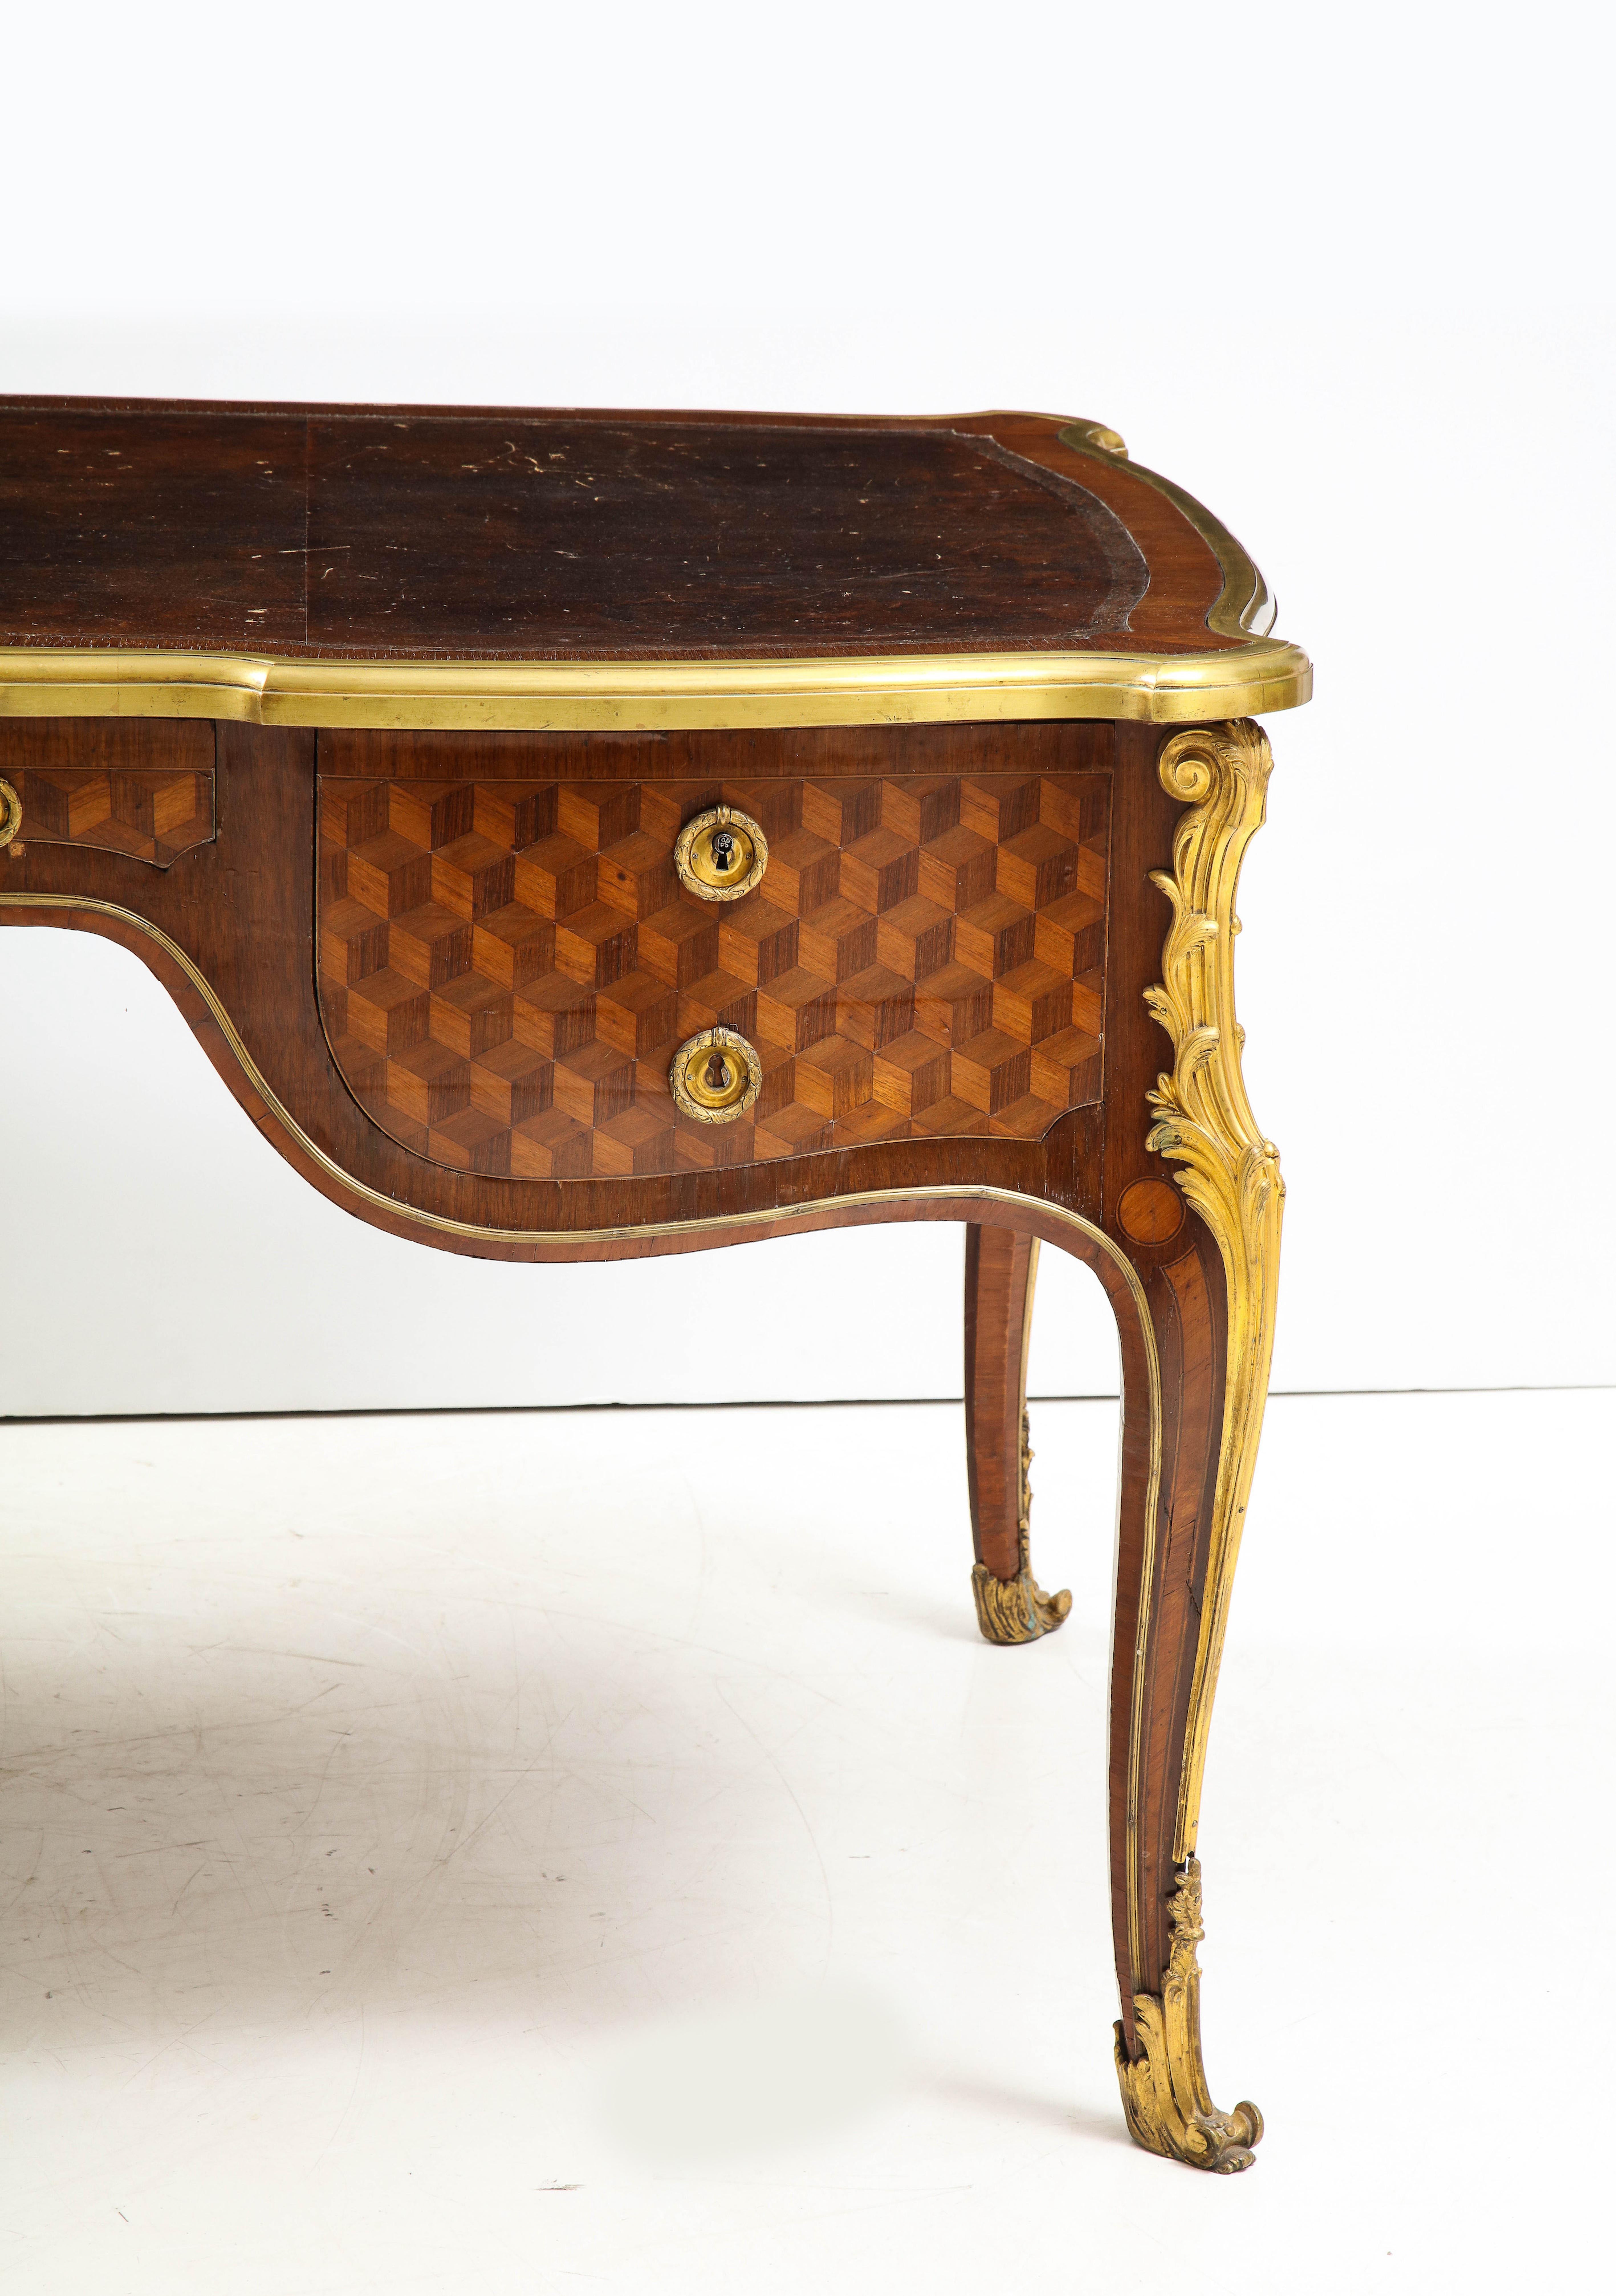 A fine and Important Louis XV style Bureau plat attributed to François Linke (1855-1946) after a model by Jean François Oeben. Typical of the work by François Linke, this desk features the finest marquetry on oak frame, showing a geometric tromp